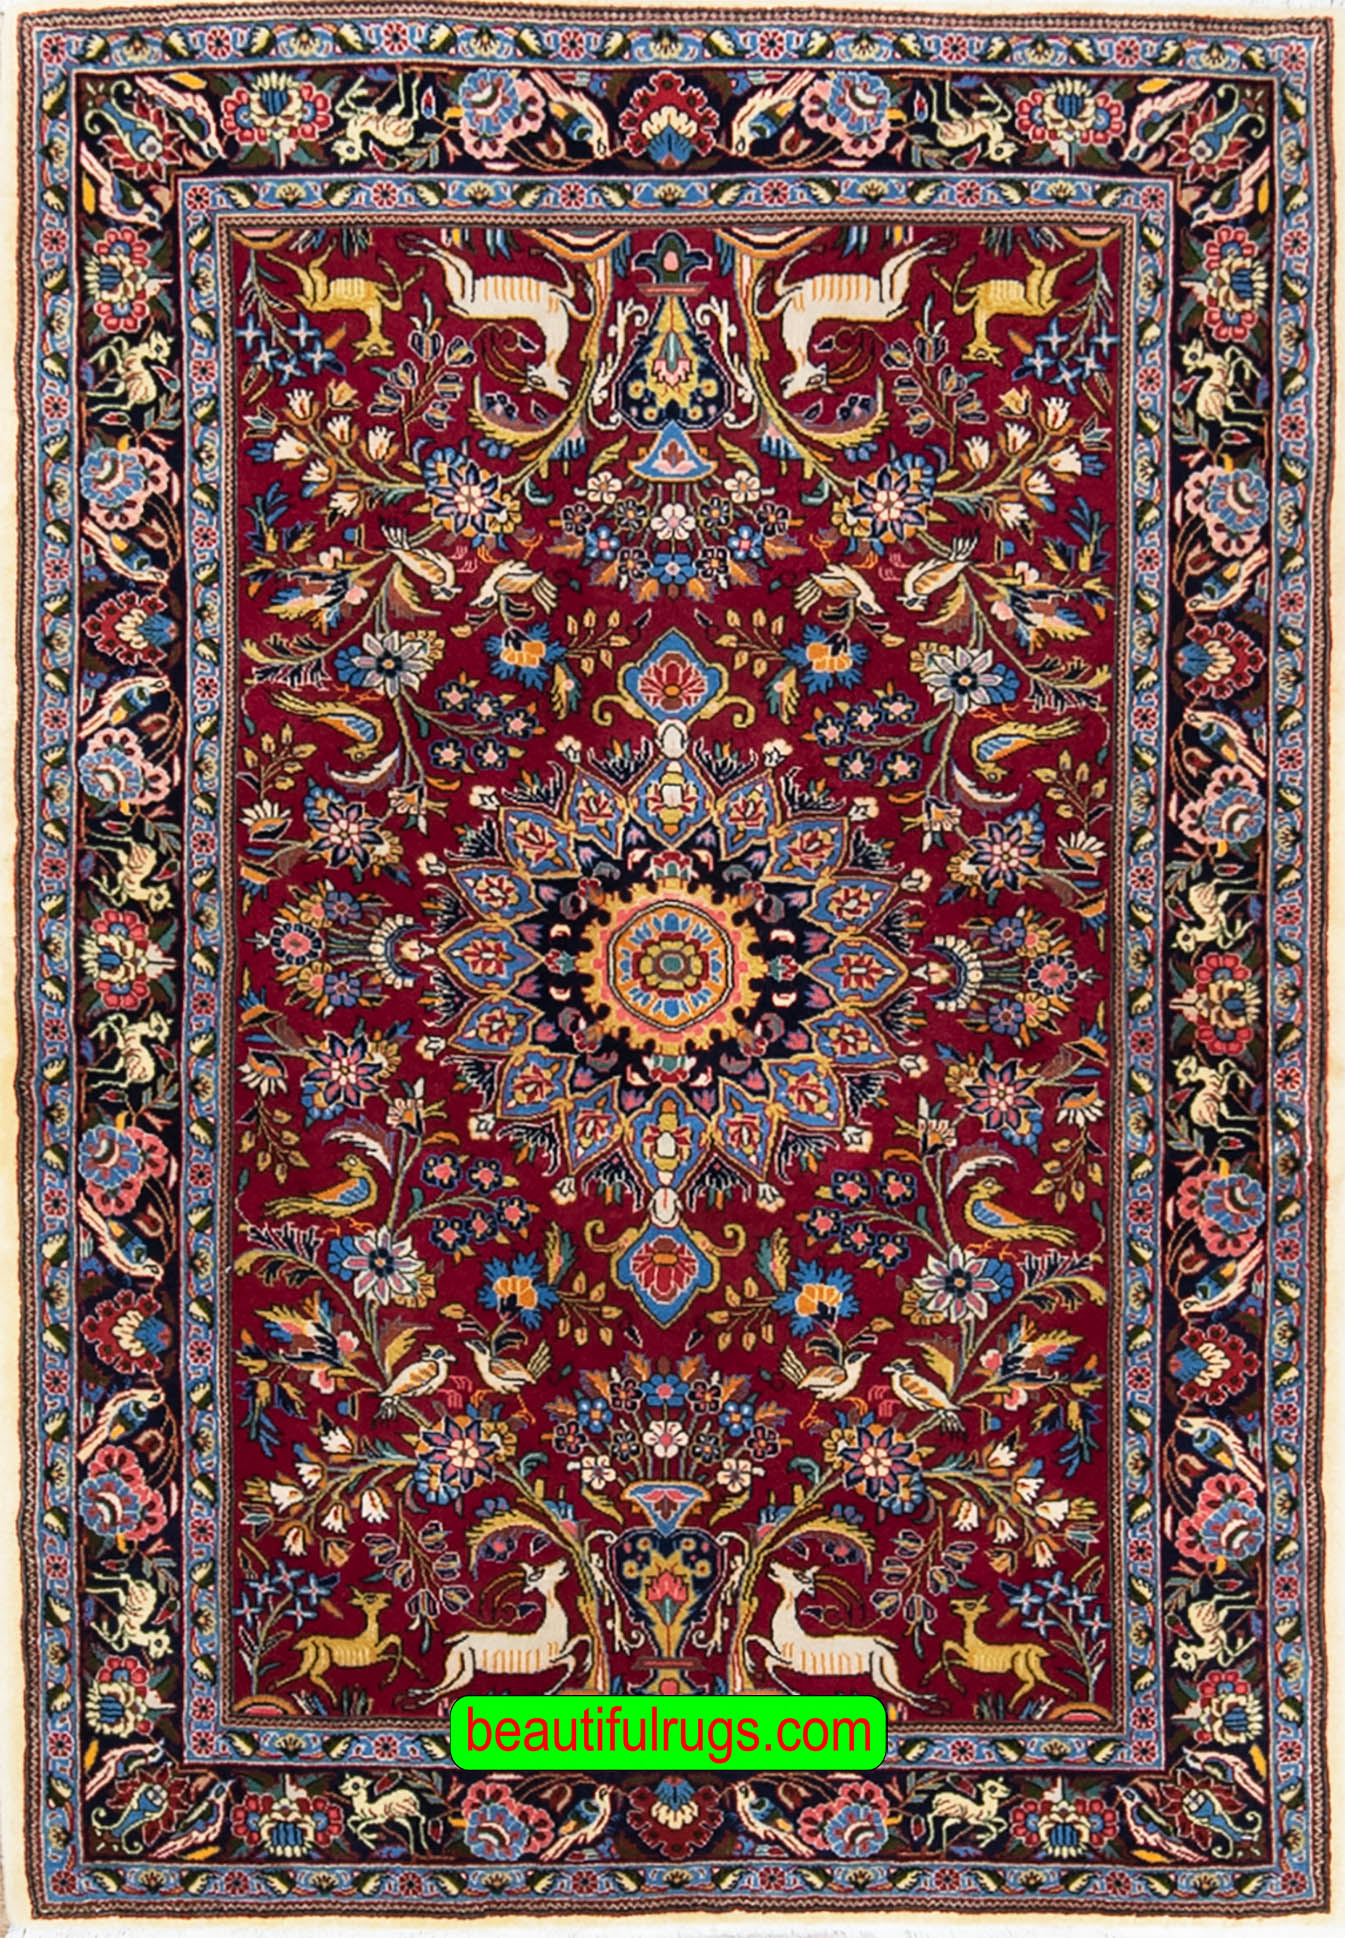 Handmade Persian Sarouk area rug with birds and animal motifs in red color. Size 4x5.10.